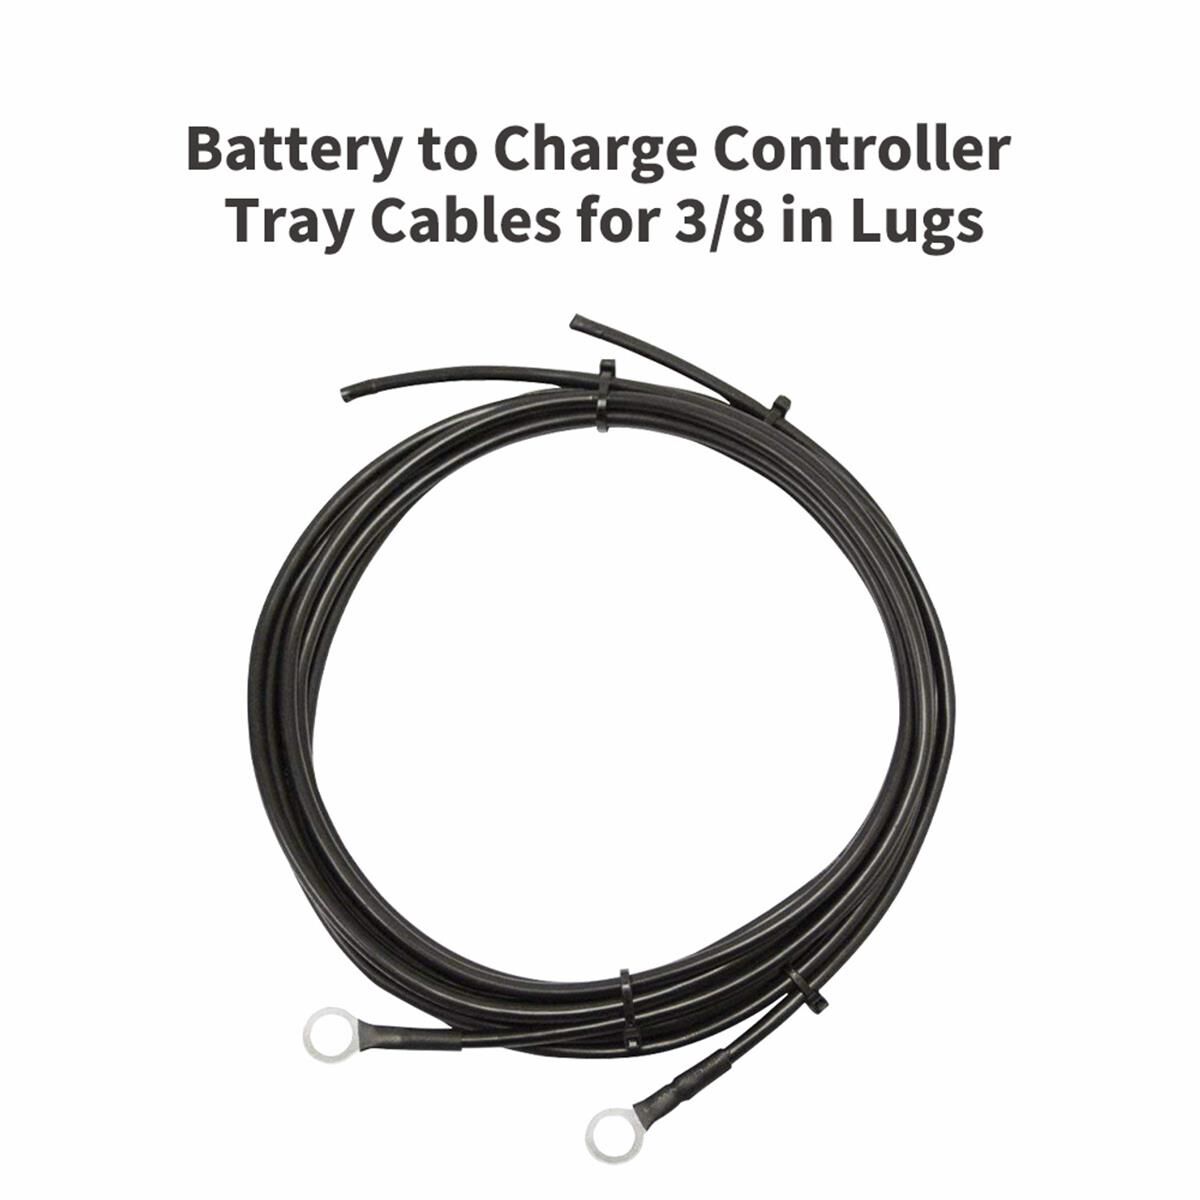 8 AWG BATTERY TO CHARGE CONTROLLER TRAY CABLES FOR 3/8 IN LUGS, , scaau_hi-res